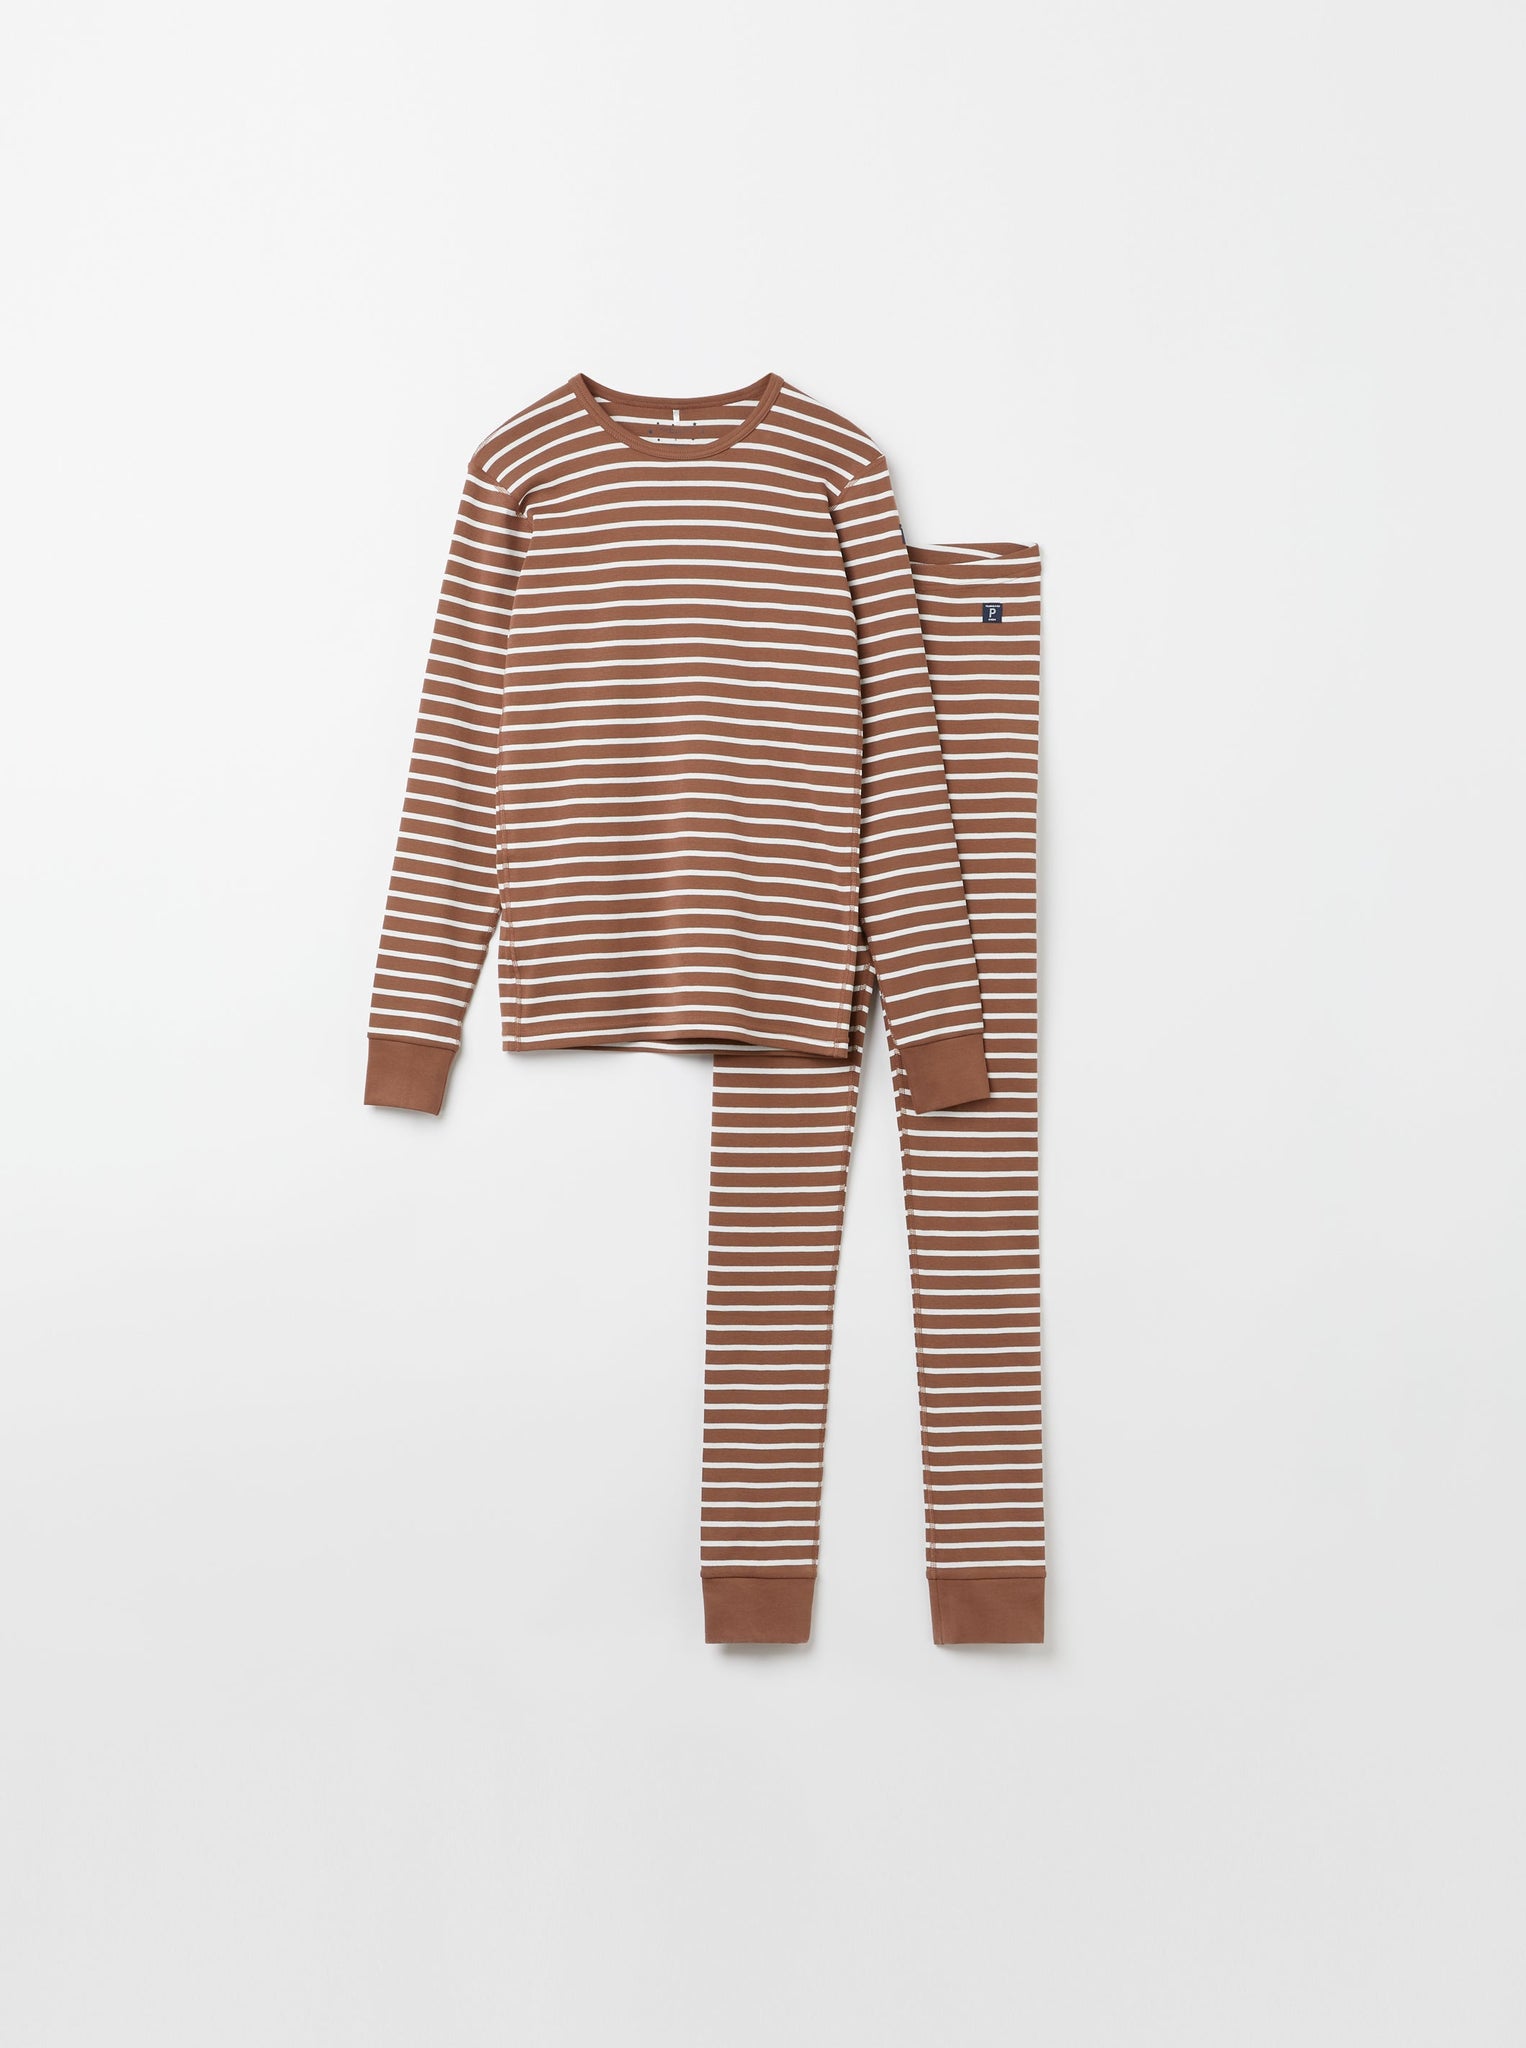 Organic Cotton Brown Adult Pyjamas from the Polarn O. Pyret adult collection. Ethically produced kids clothing.